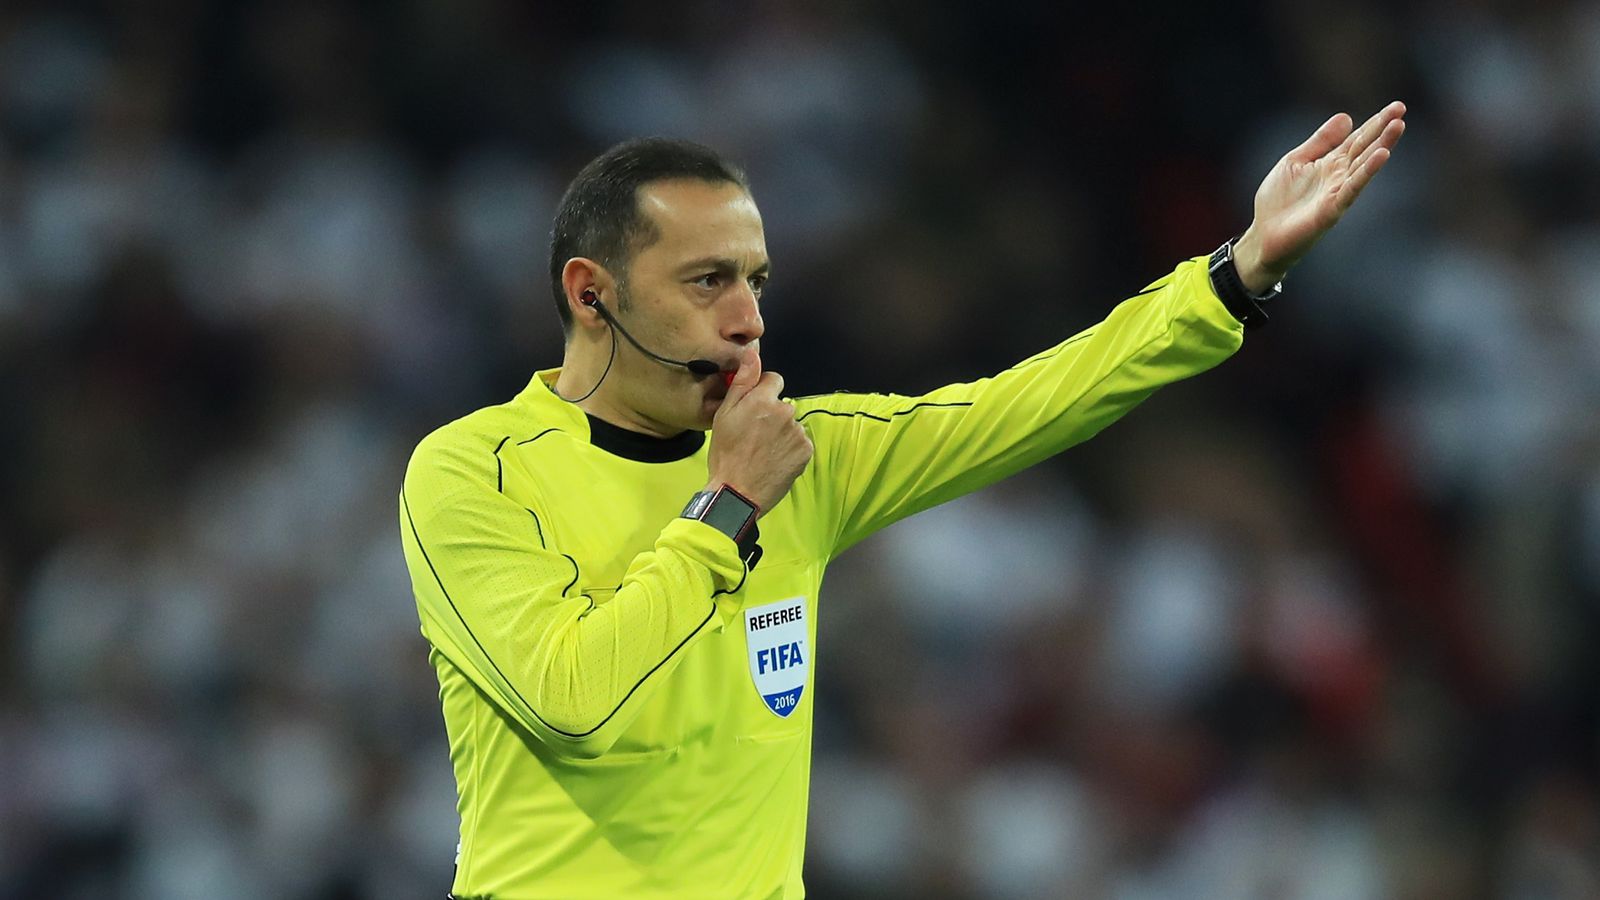 Referee Announced For Champions League Match Between Real Madrid